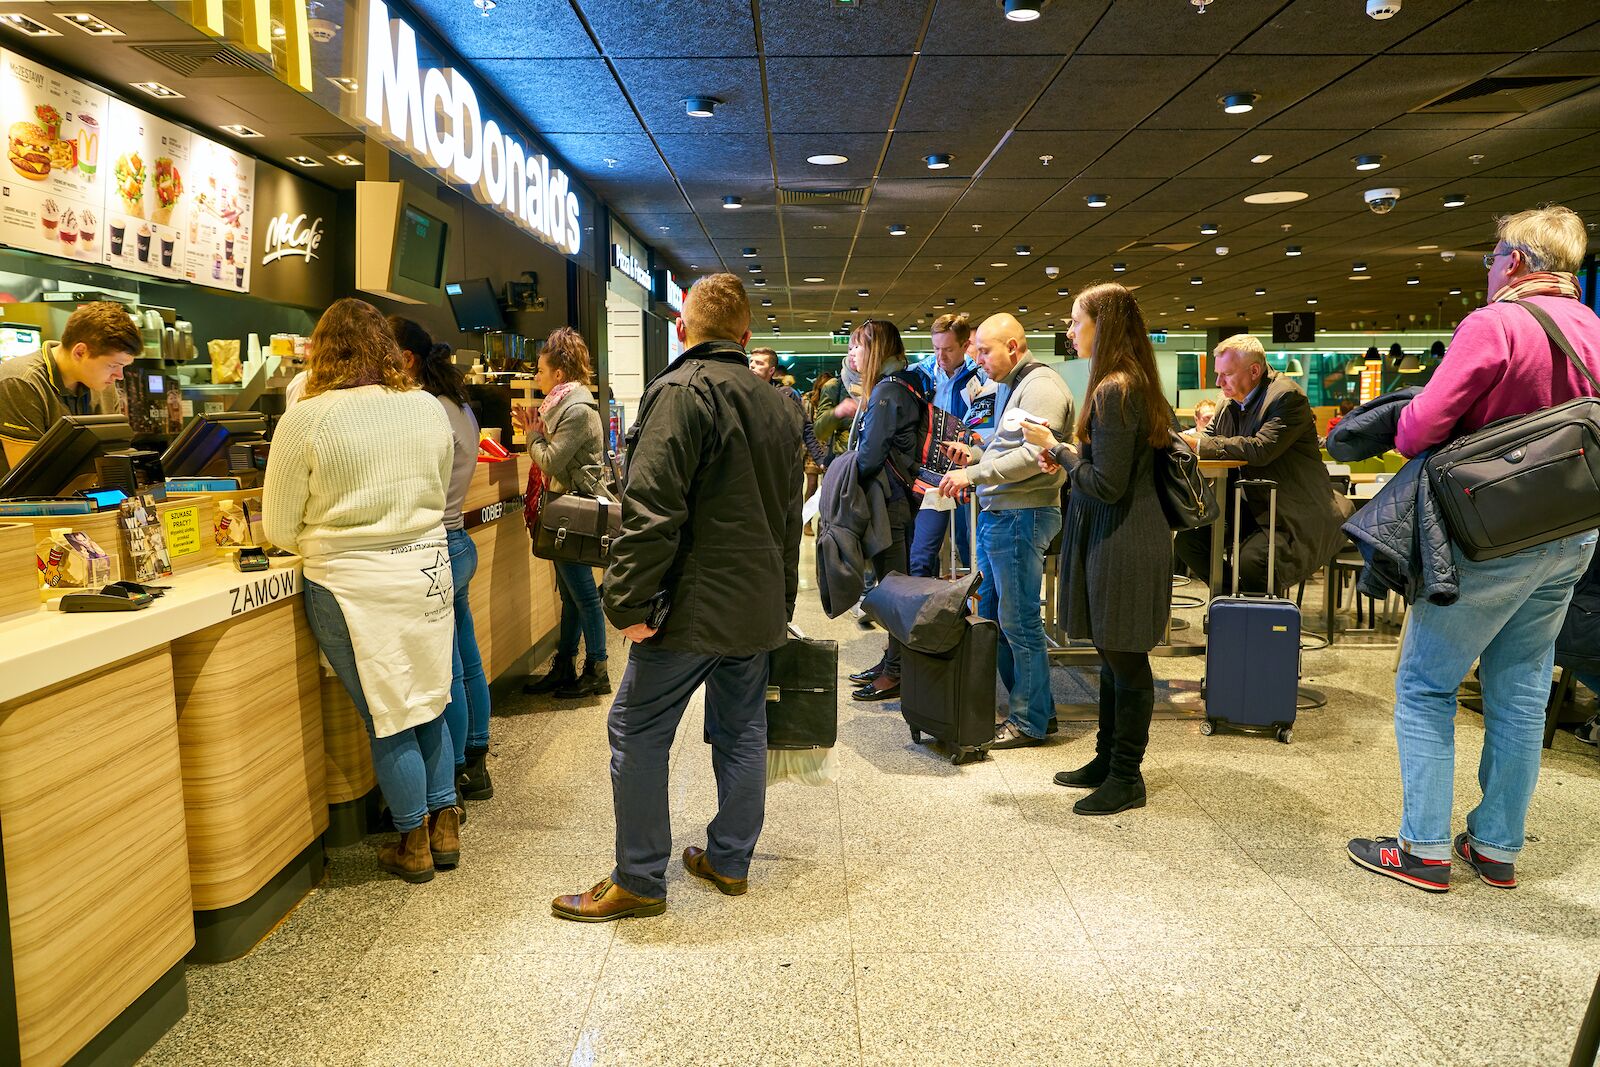 A long line at McDonald's counter in an airport in Poland